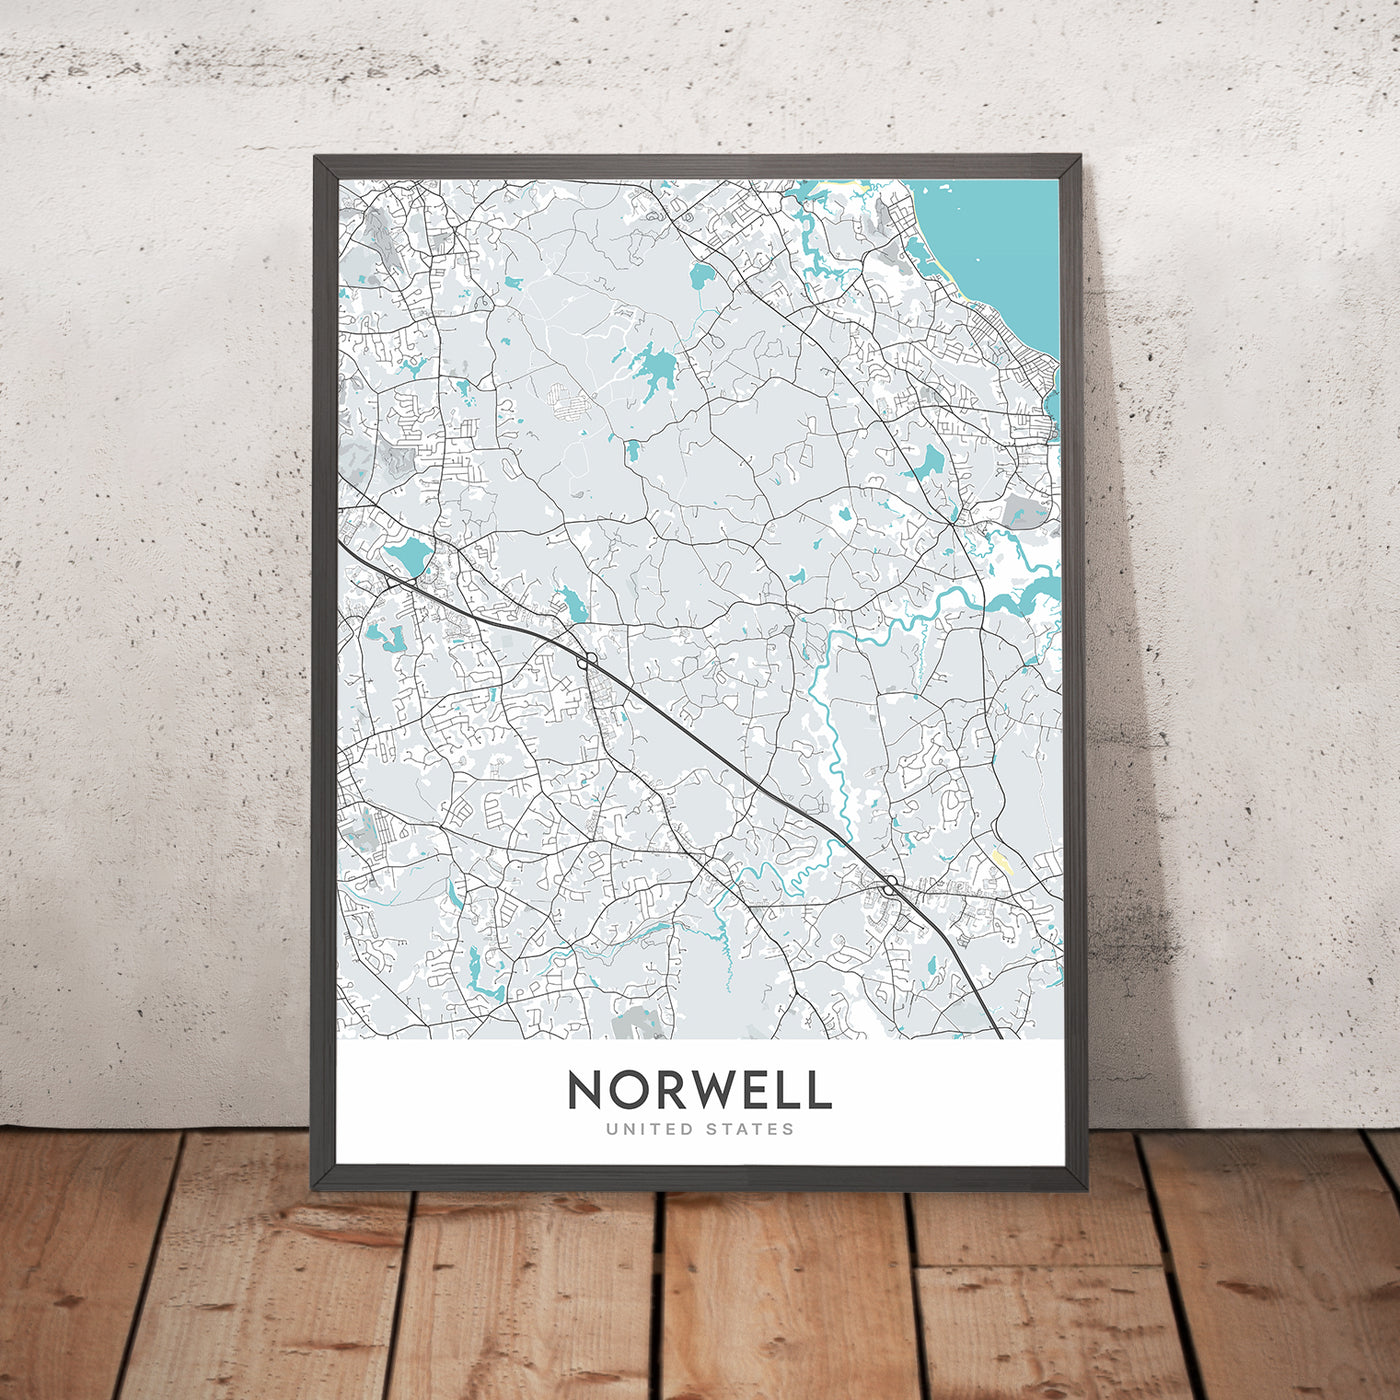 Moderner Stadtplan von Norwell, MA: Norwell Center, North River, South River, Indian Head River, Jacobs Pond